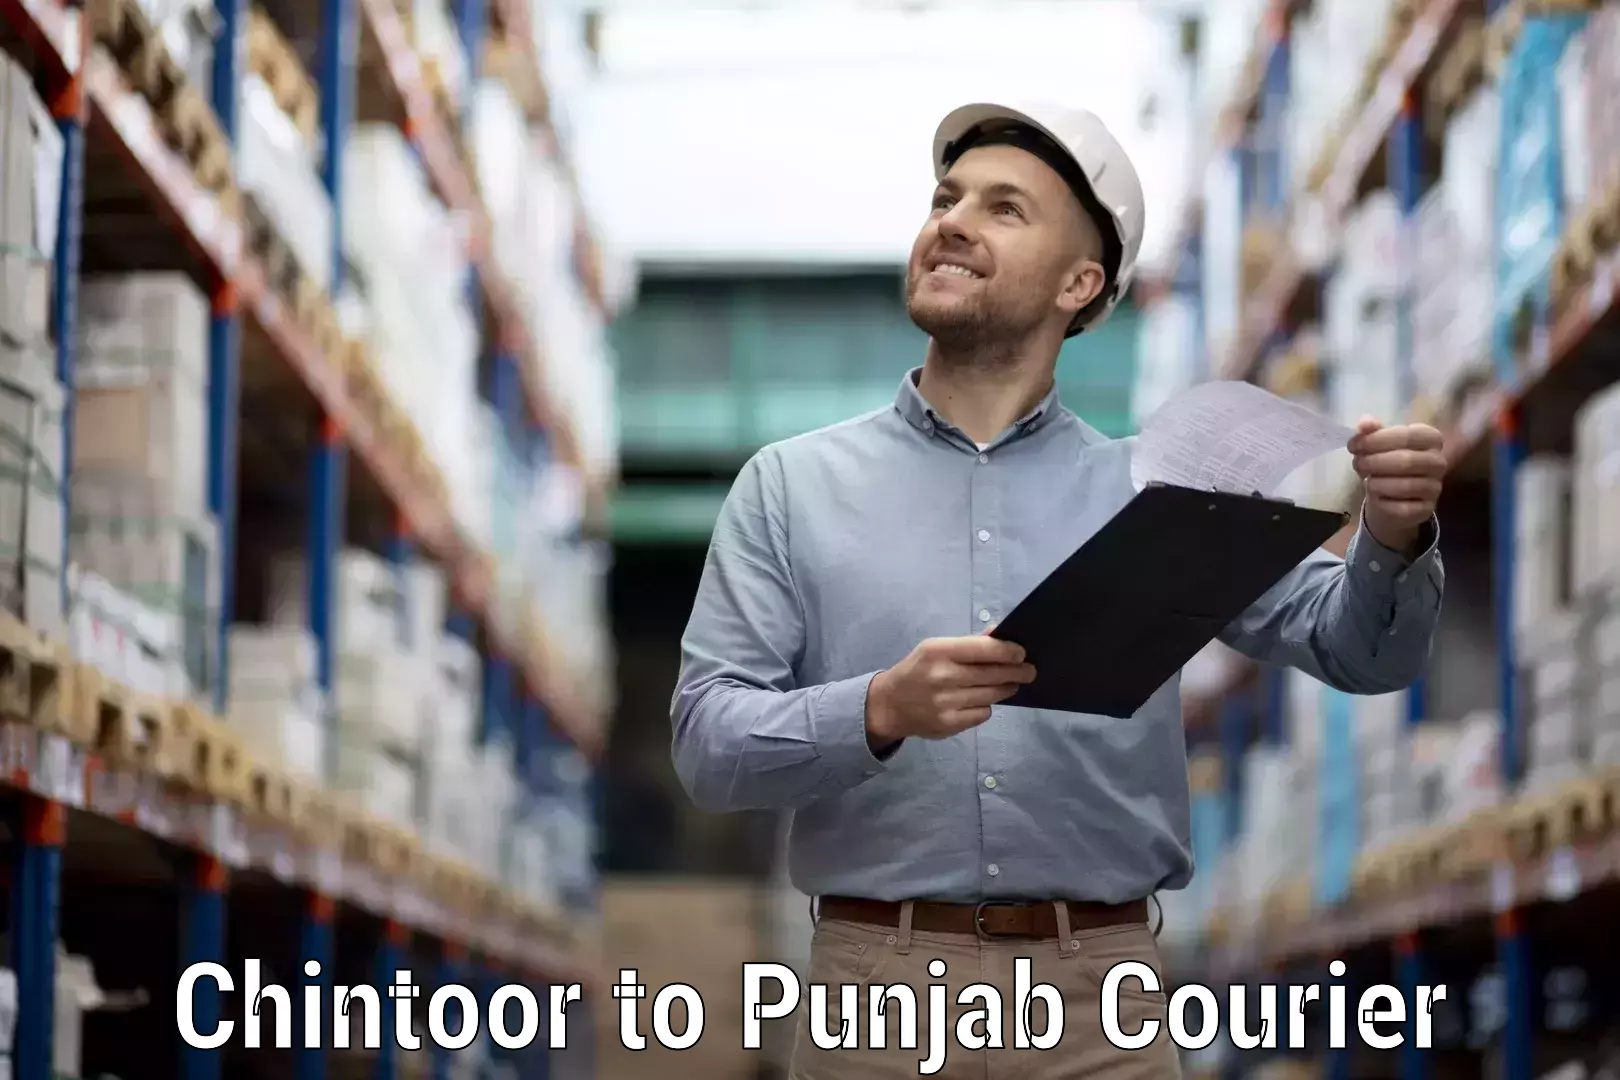 Supply chain delivery Chintoor to Pathankot